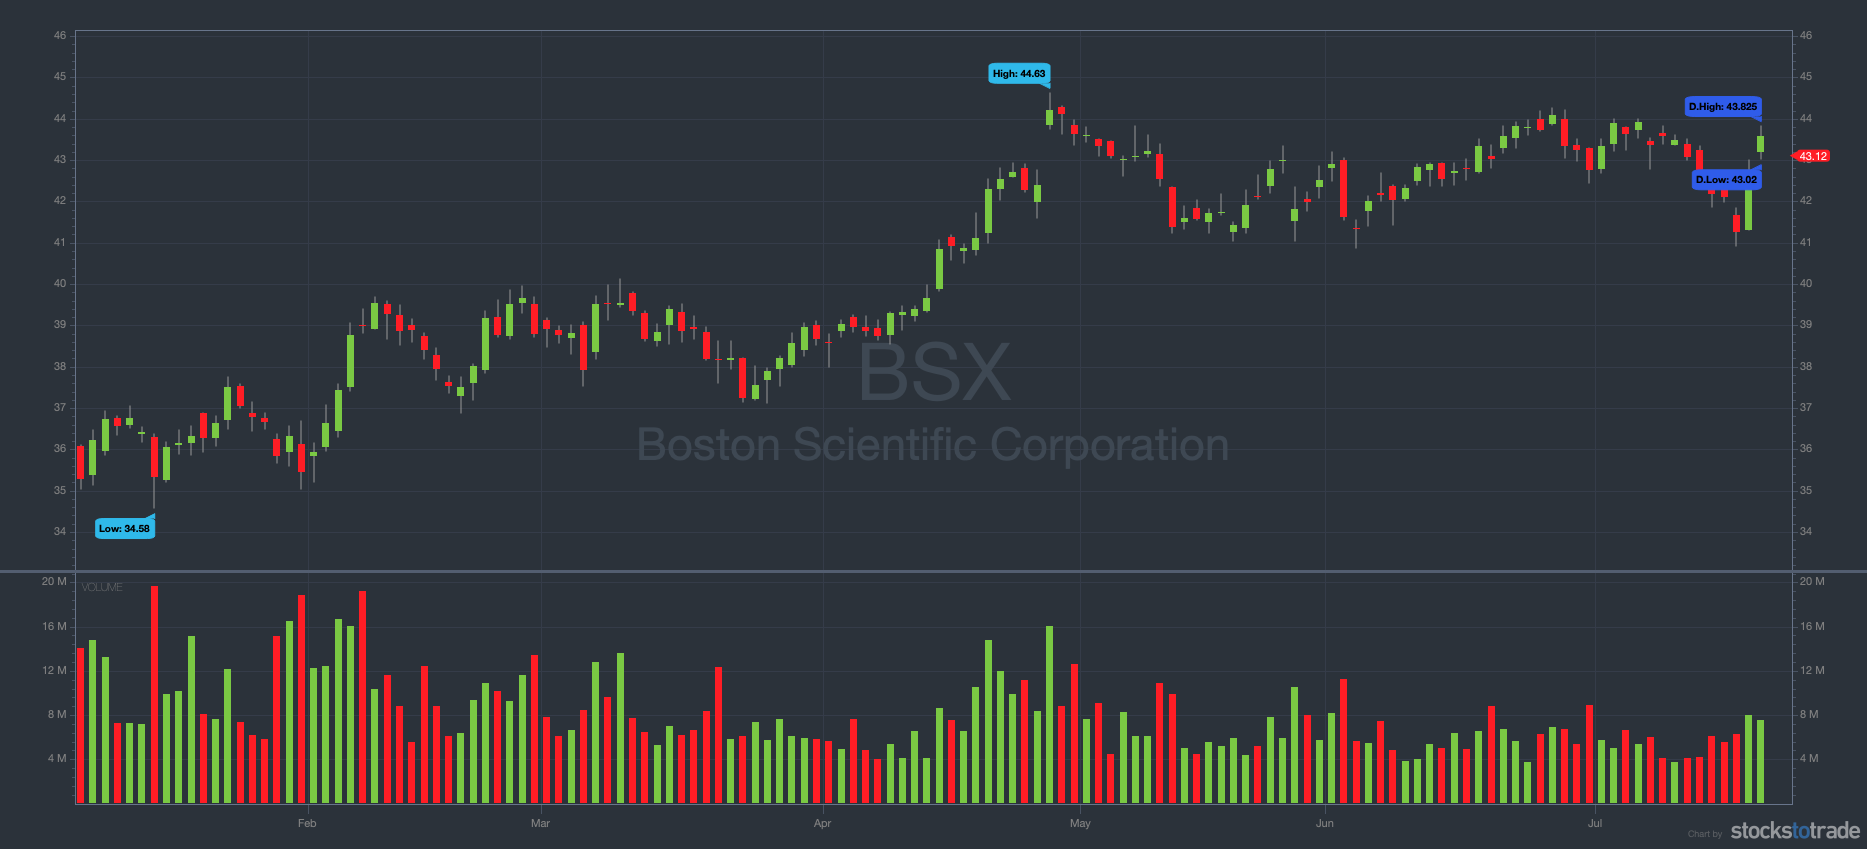 healthcare stocks bsx